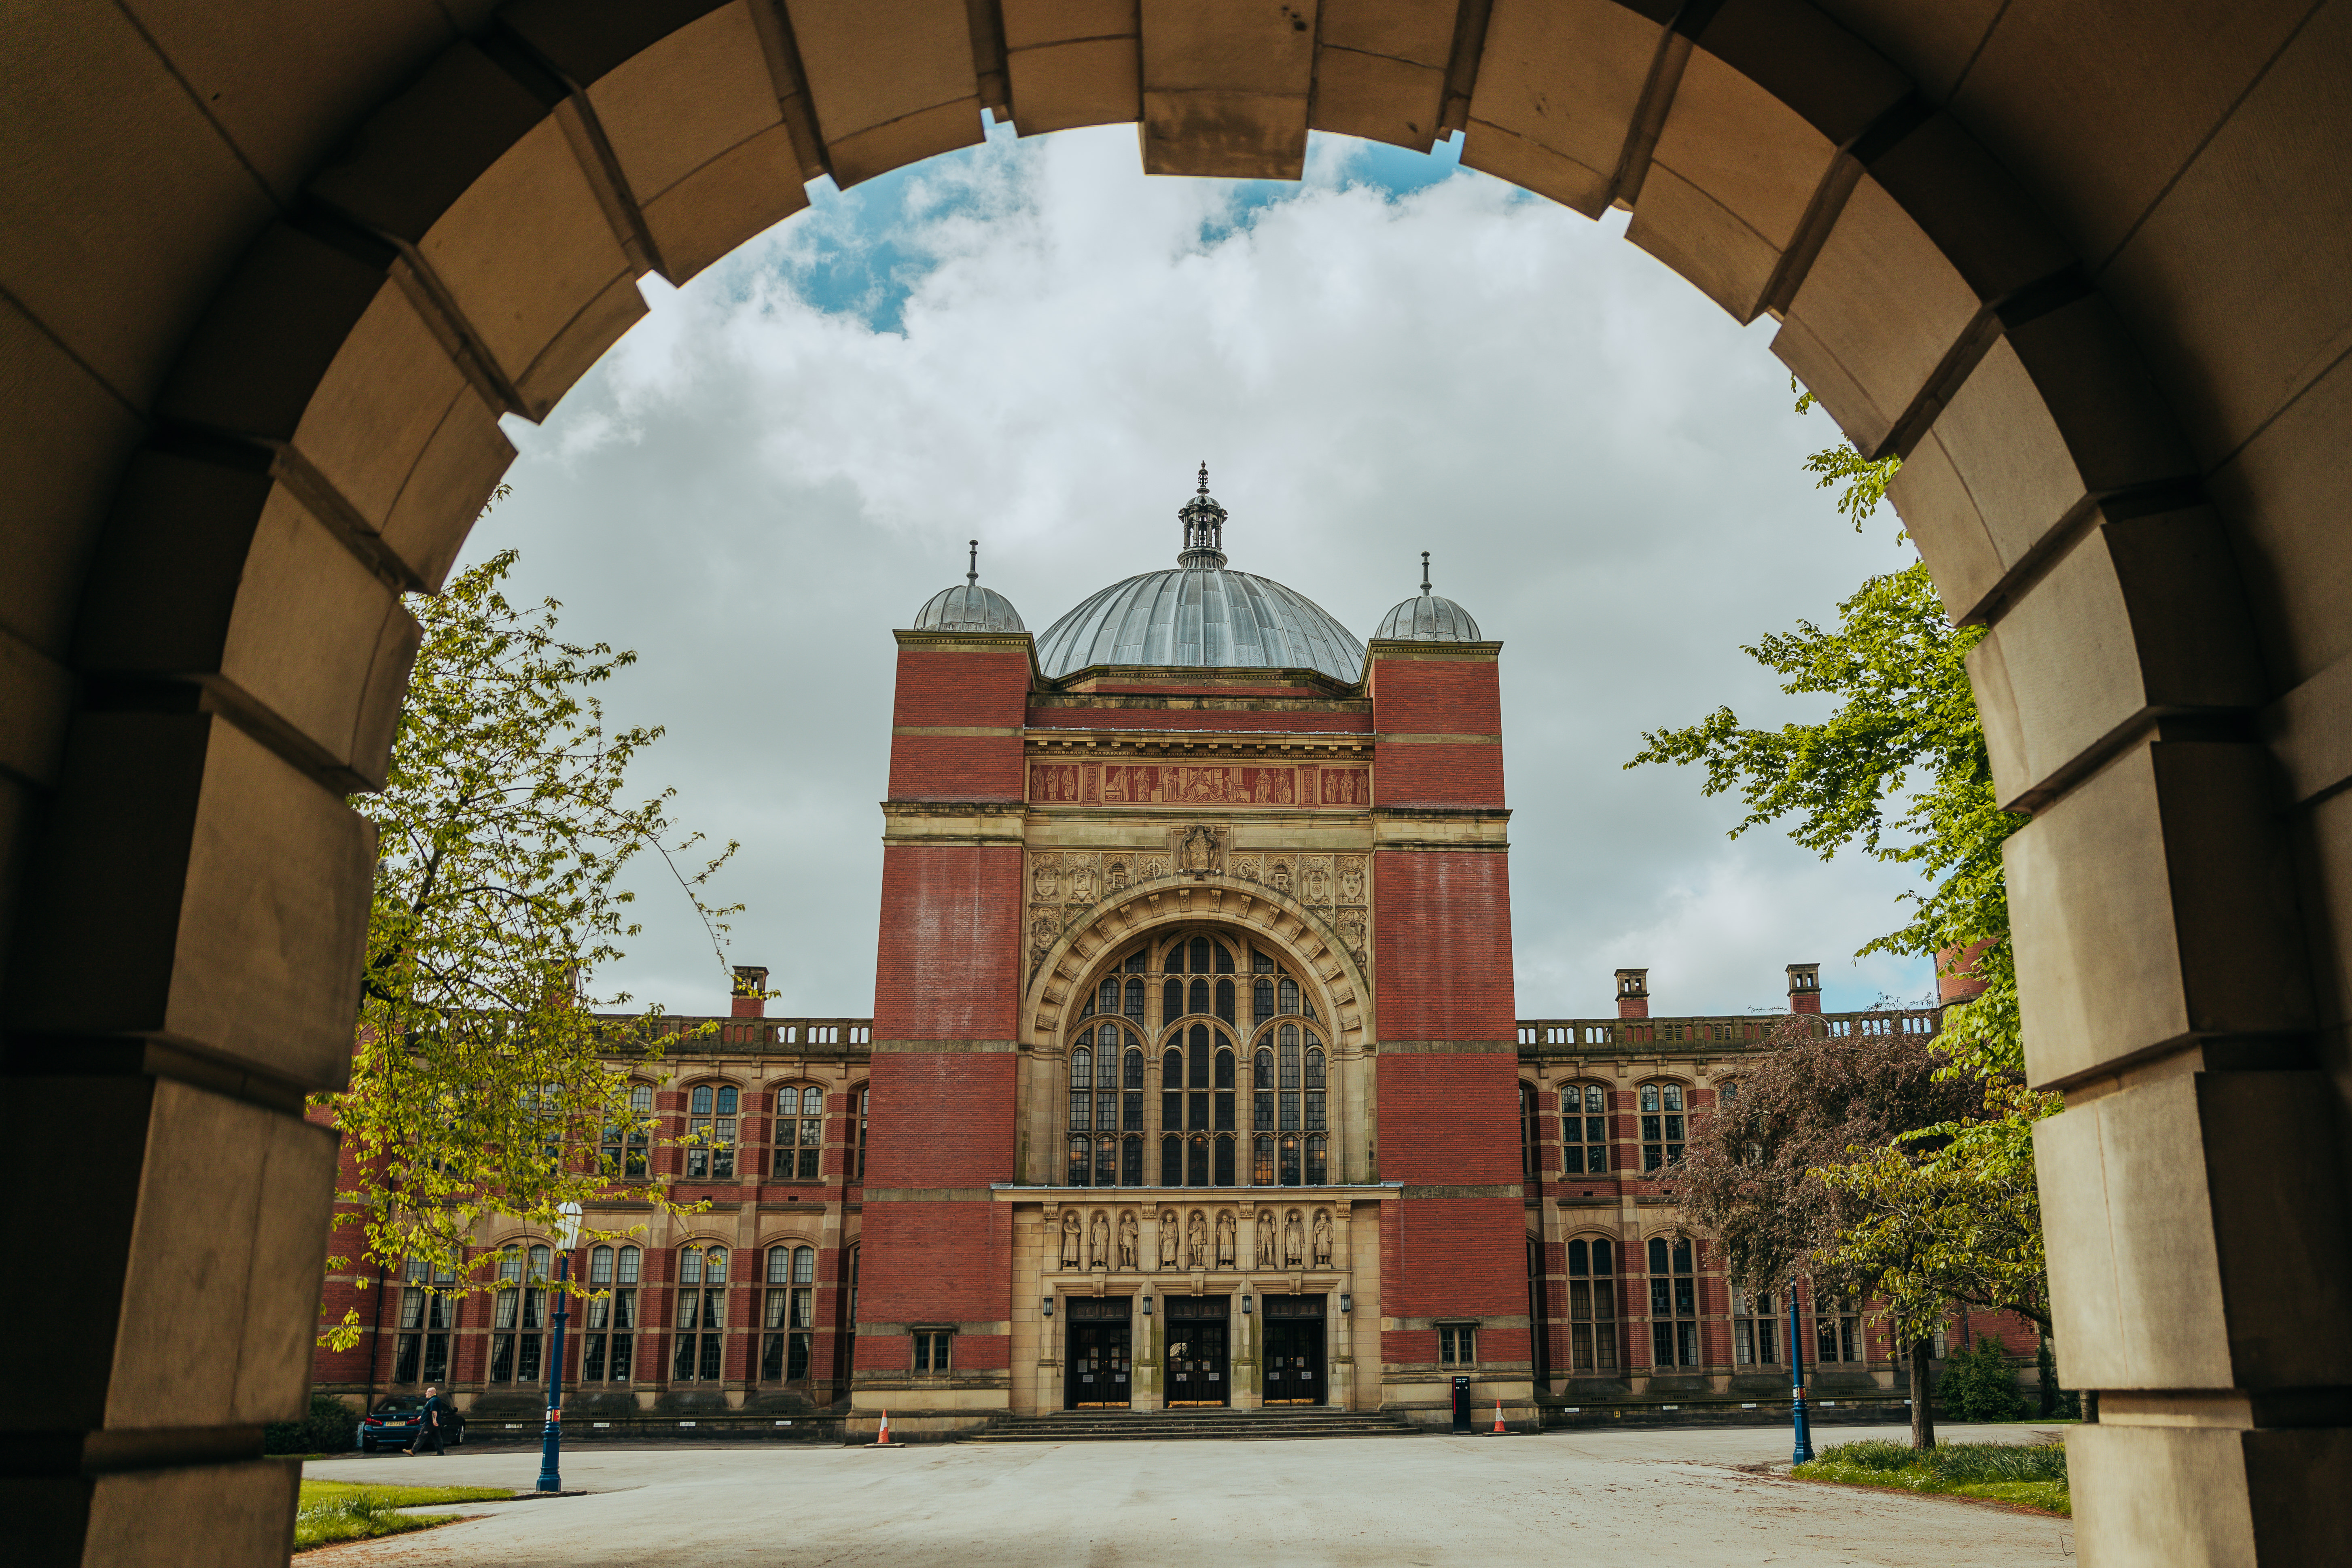 A view of the Aston Webb entrance on the University of Birmingham campus